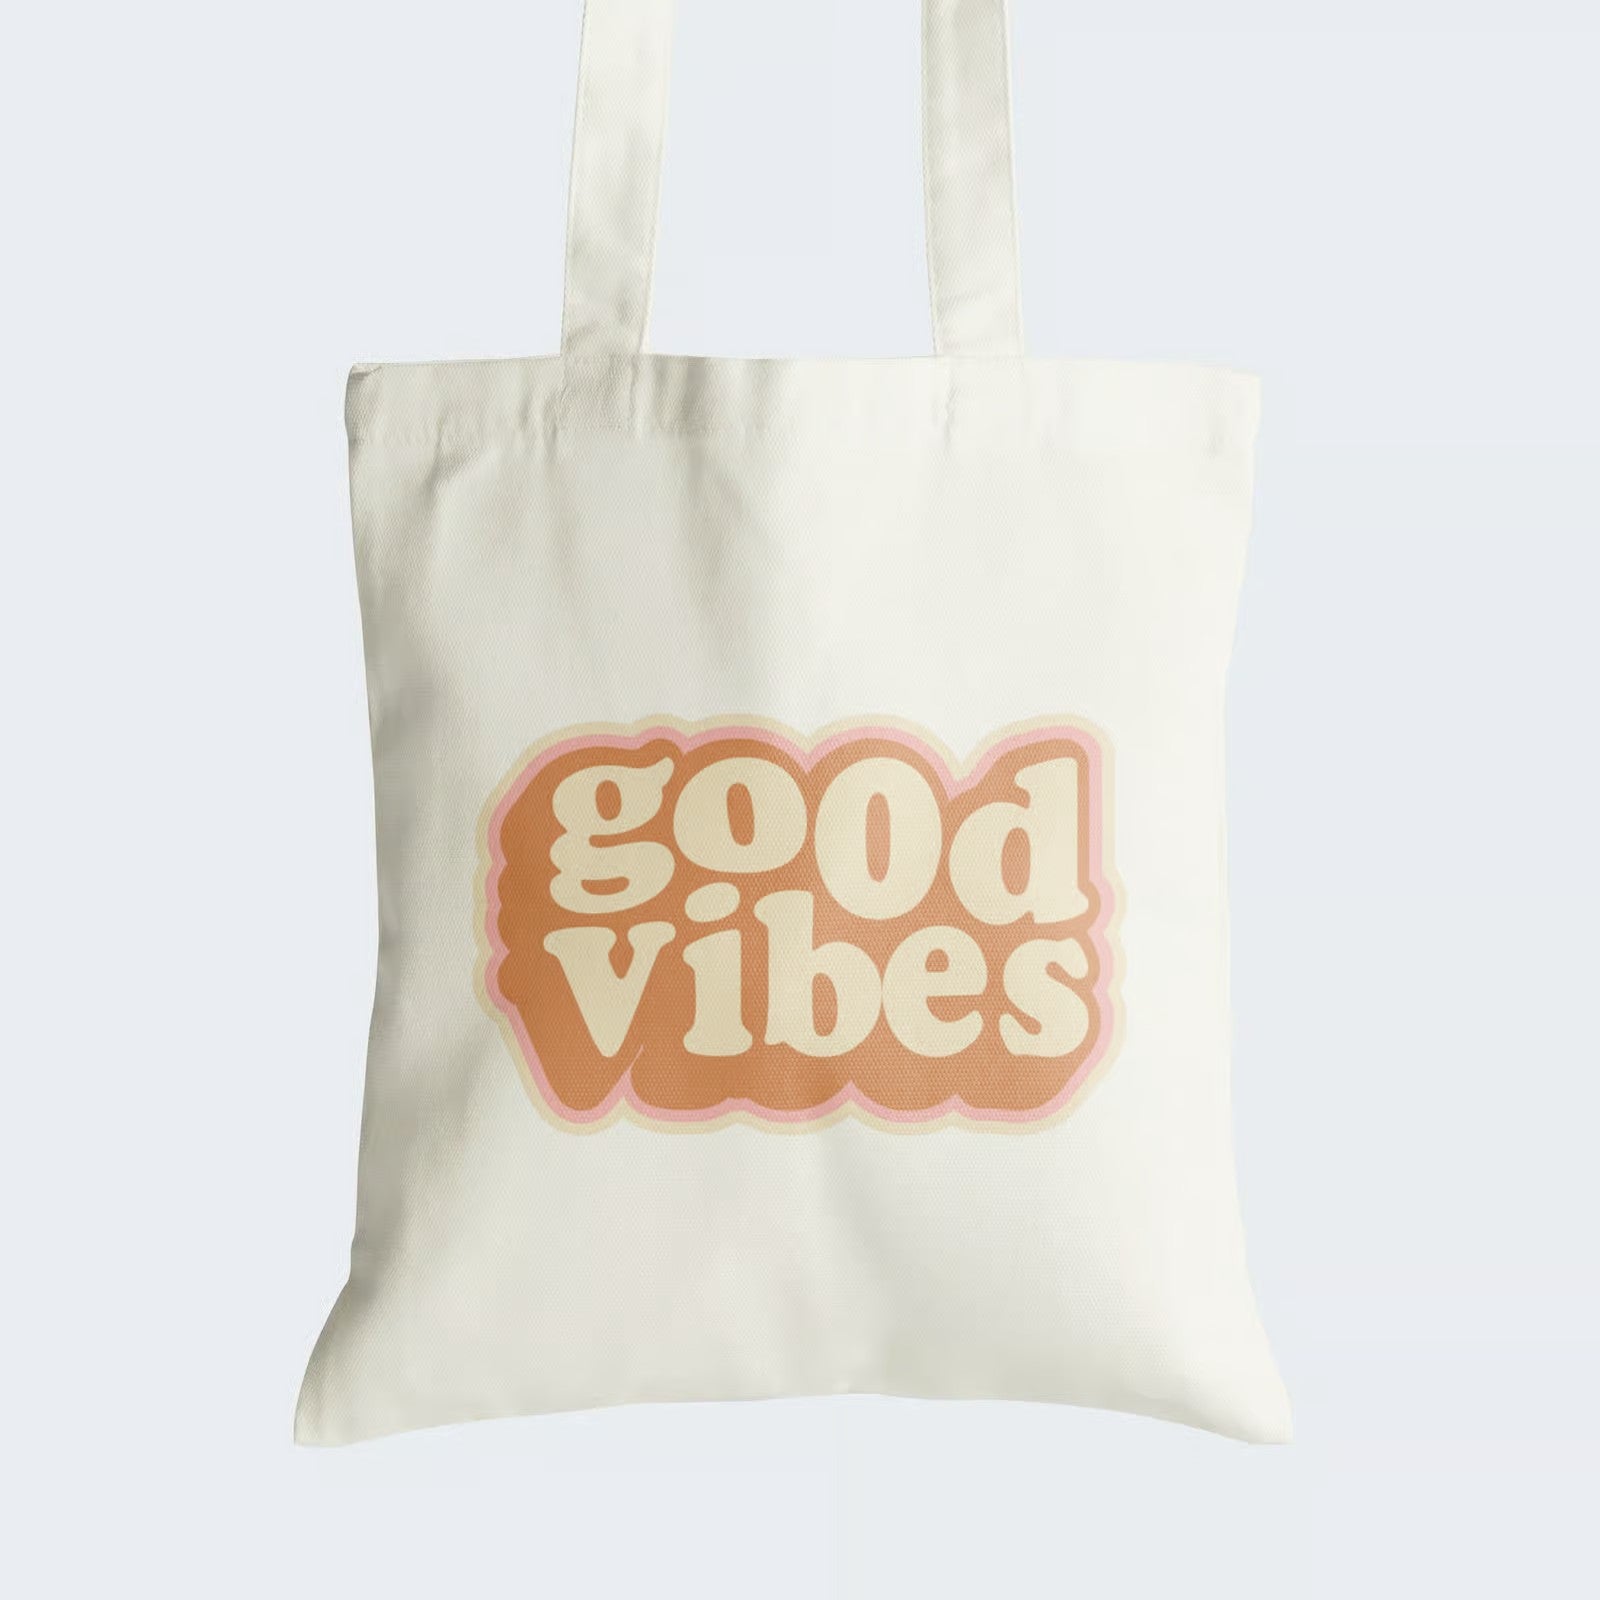 Elevate your style and radiate positivity with our "Good Vibes" Cotton Canvas Tote Bag. This vibrant tote showcases the words "Good Vibes" in cheerful orange and yellow lettering, spreading optimism wherever you go. Crafted for both durability and style, it includes a secure zipper closure for daily convenience. Carry this fashionable reminder to share positivity and embrace the good vibes in life. Order your Cotton Canvas Tote Bag today and let your style speak positively!